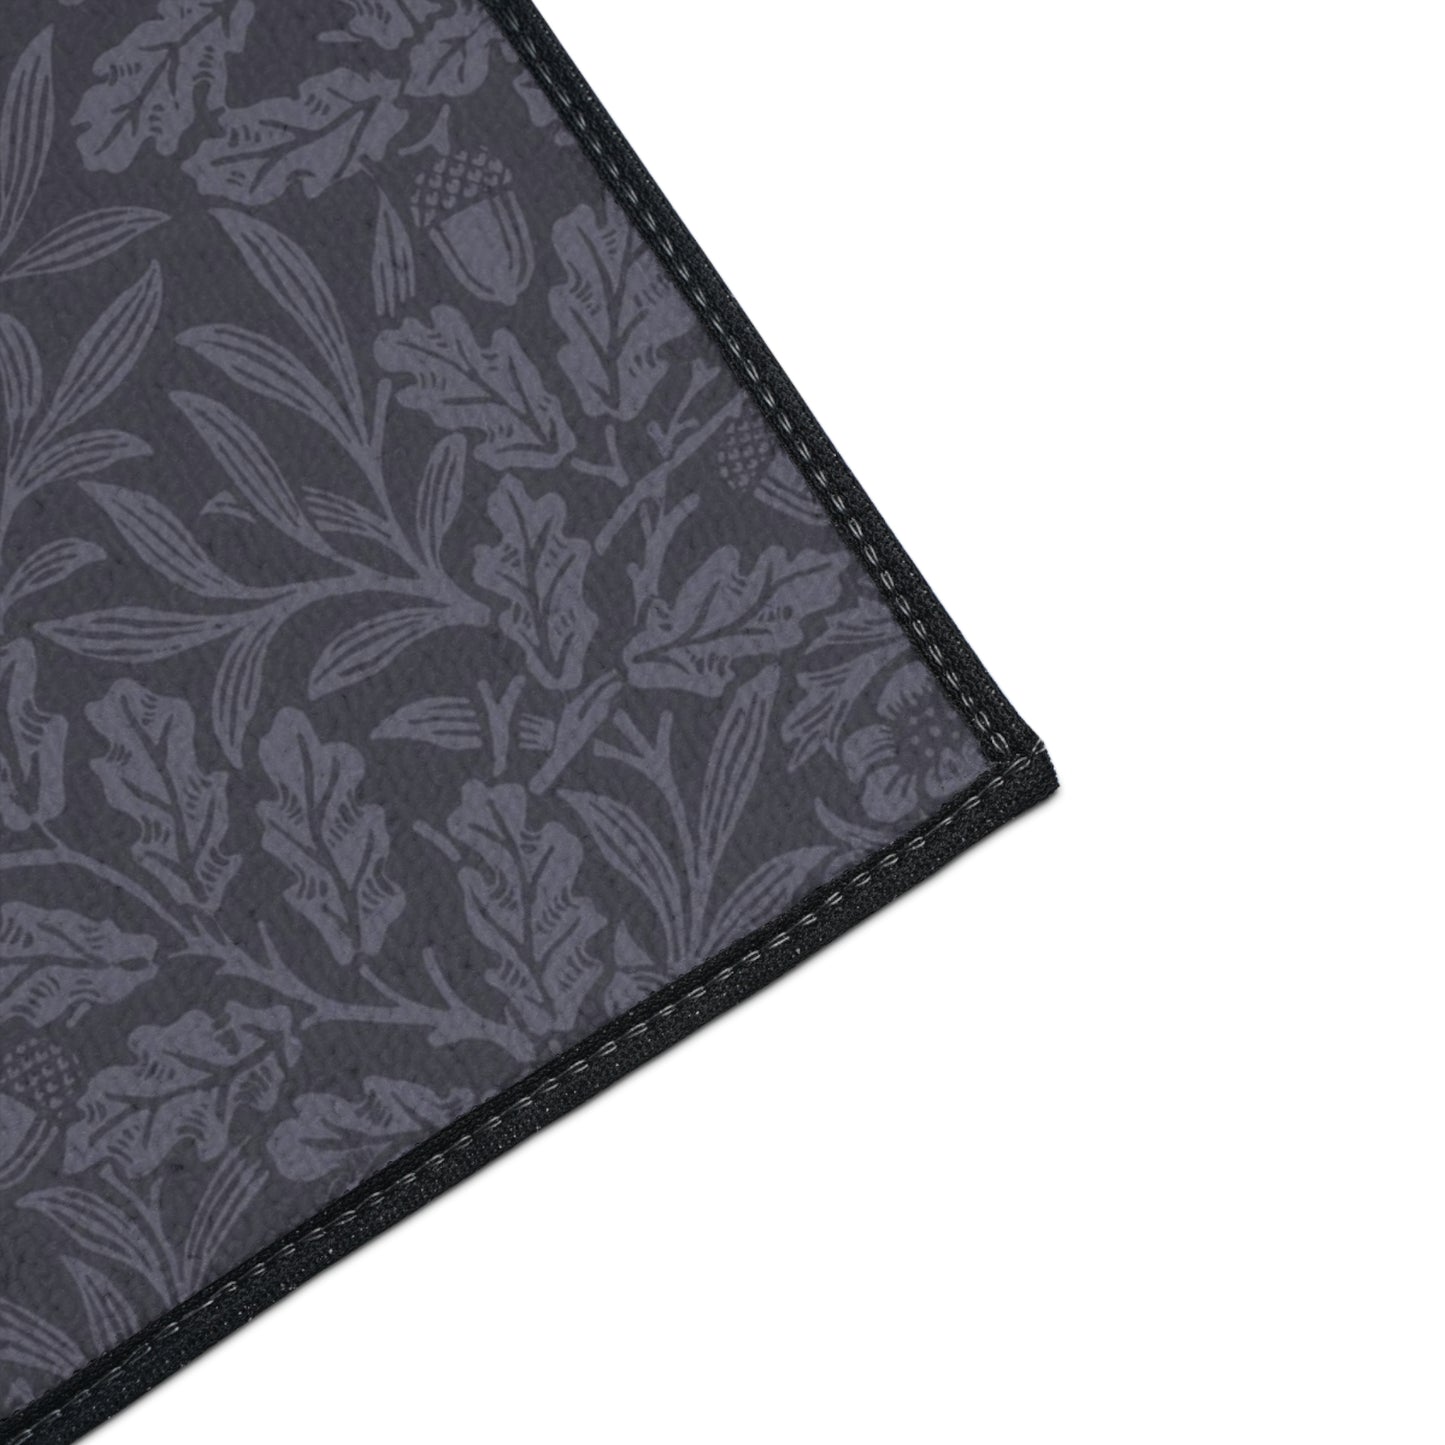 william-morris-co-heavy-duty-floor-mat-acorns-and-oak-leaves-collection-smoky-blue-18